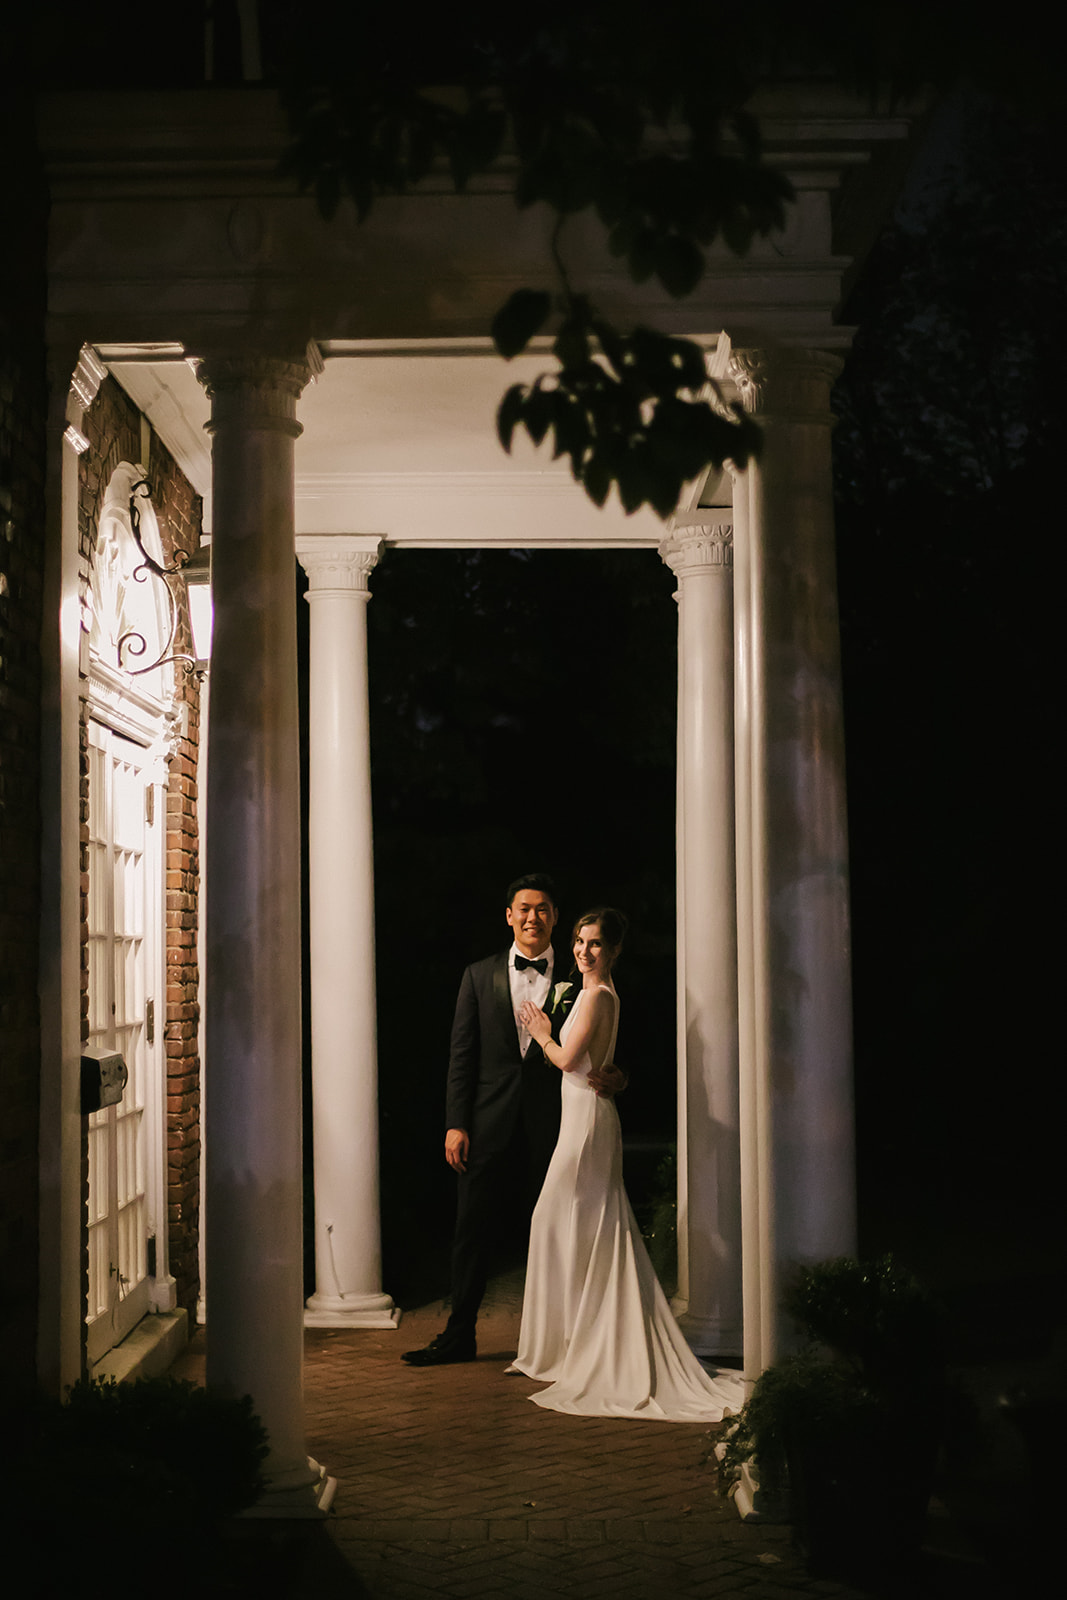 Sophisticated wedding photography in New Jersey